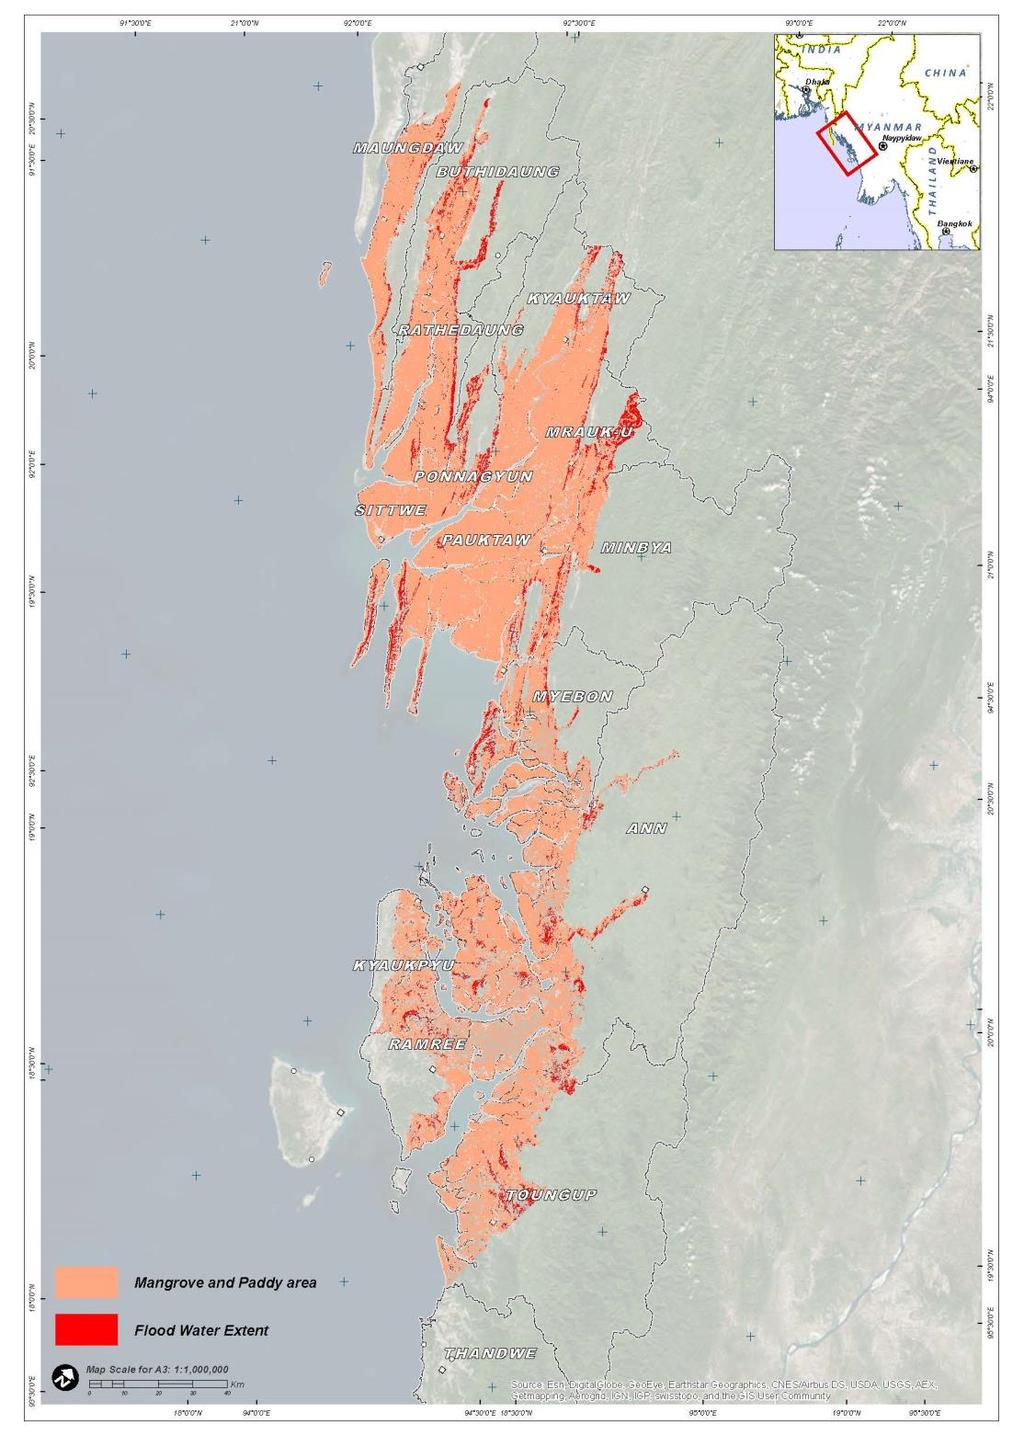 The map below illustrates satellite detected water extent by landcover type derived from the landcover map data and analysis of Rakhine State, Myanmar produced by UNITAR UNOSAT in 2015 (http://www.